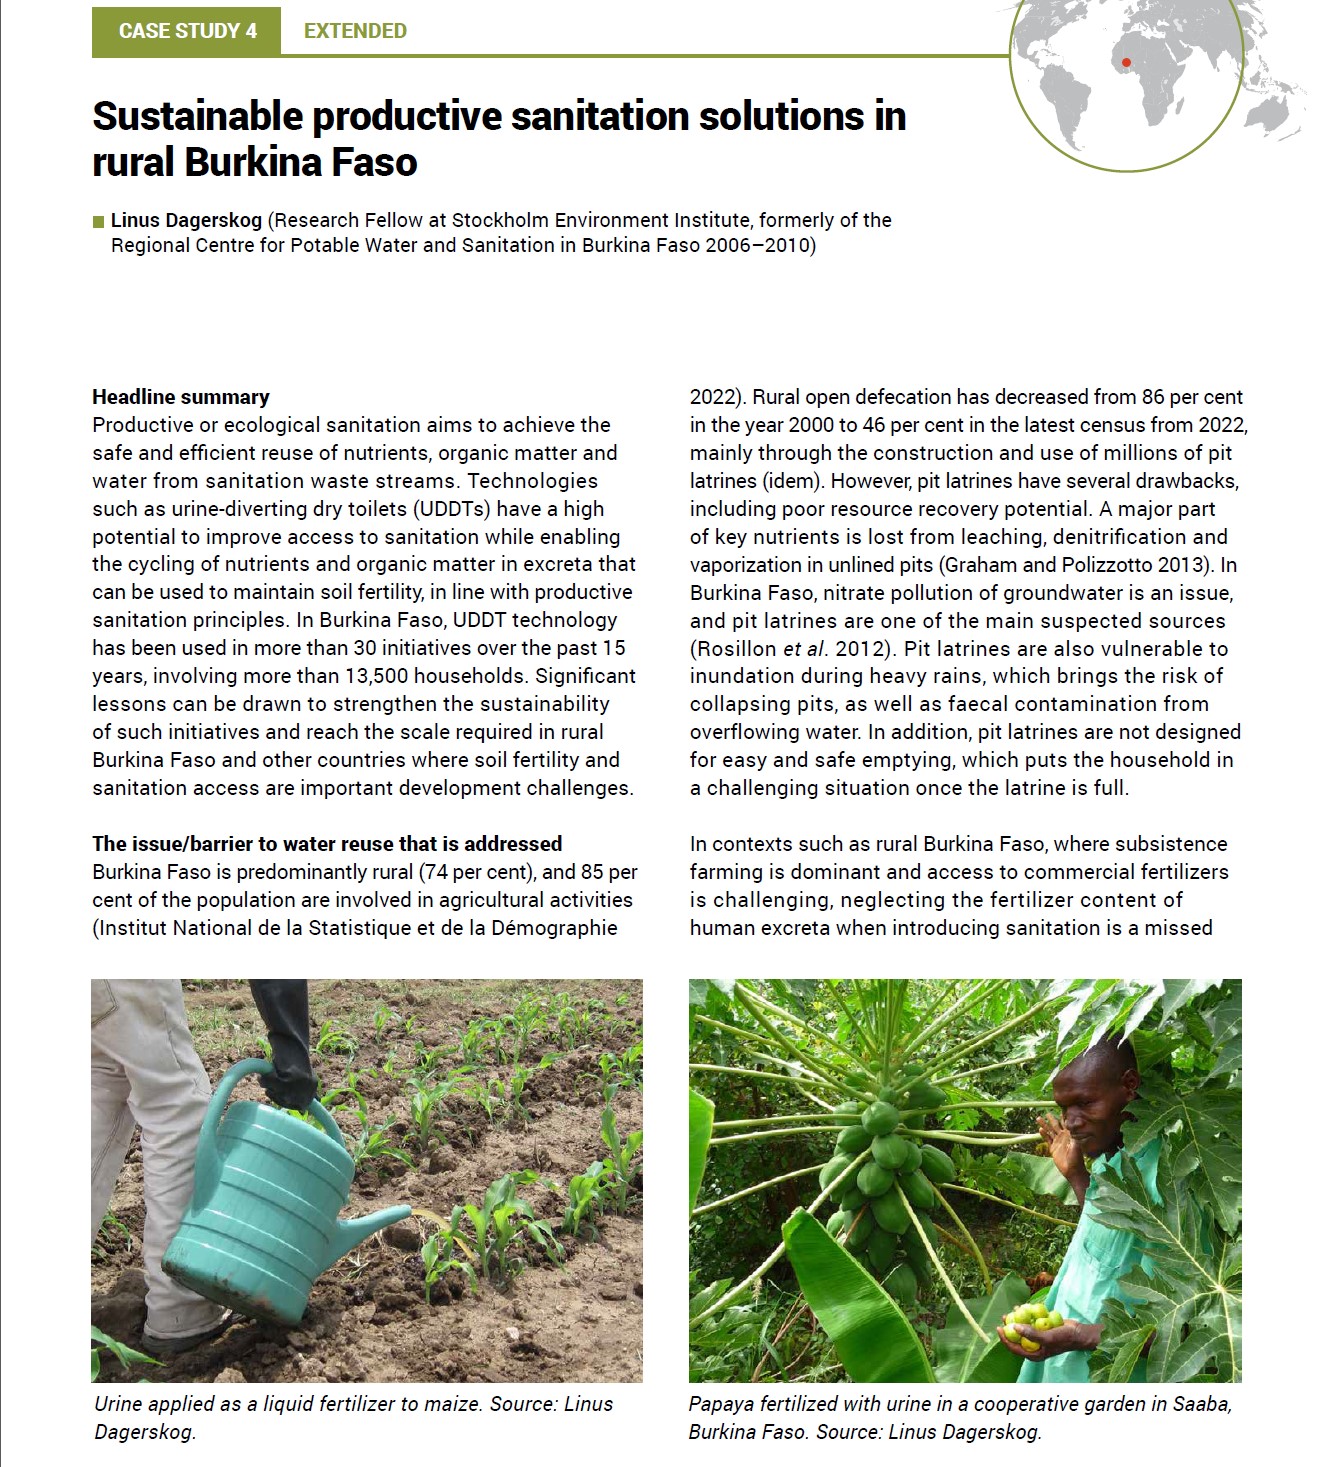 Case Study 4: Sustainable productive sanitation solutions in rural Burkina Faso